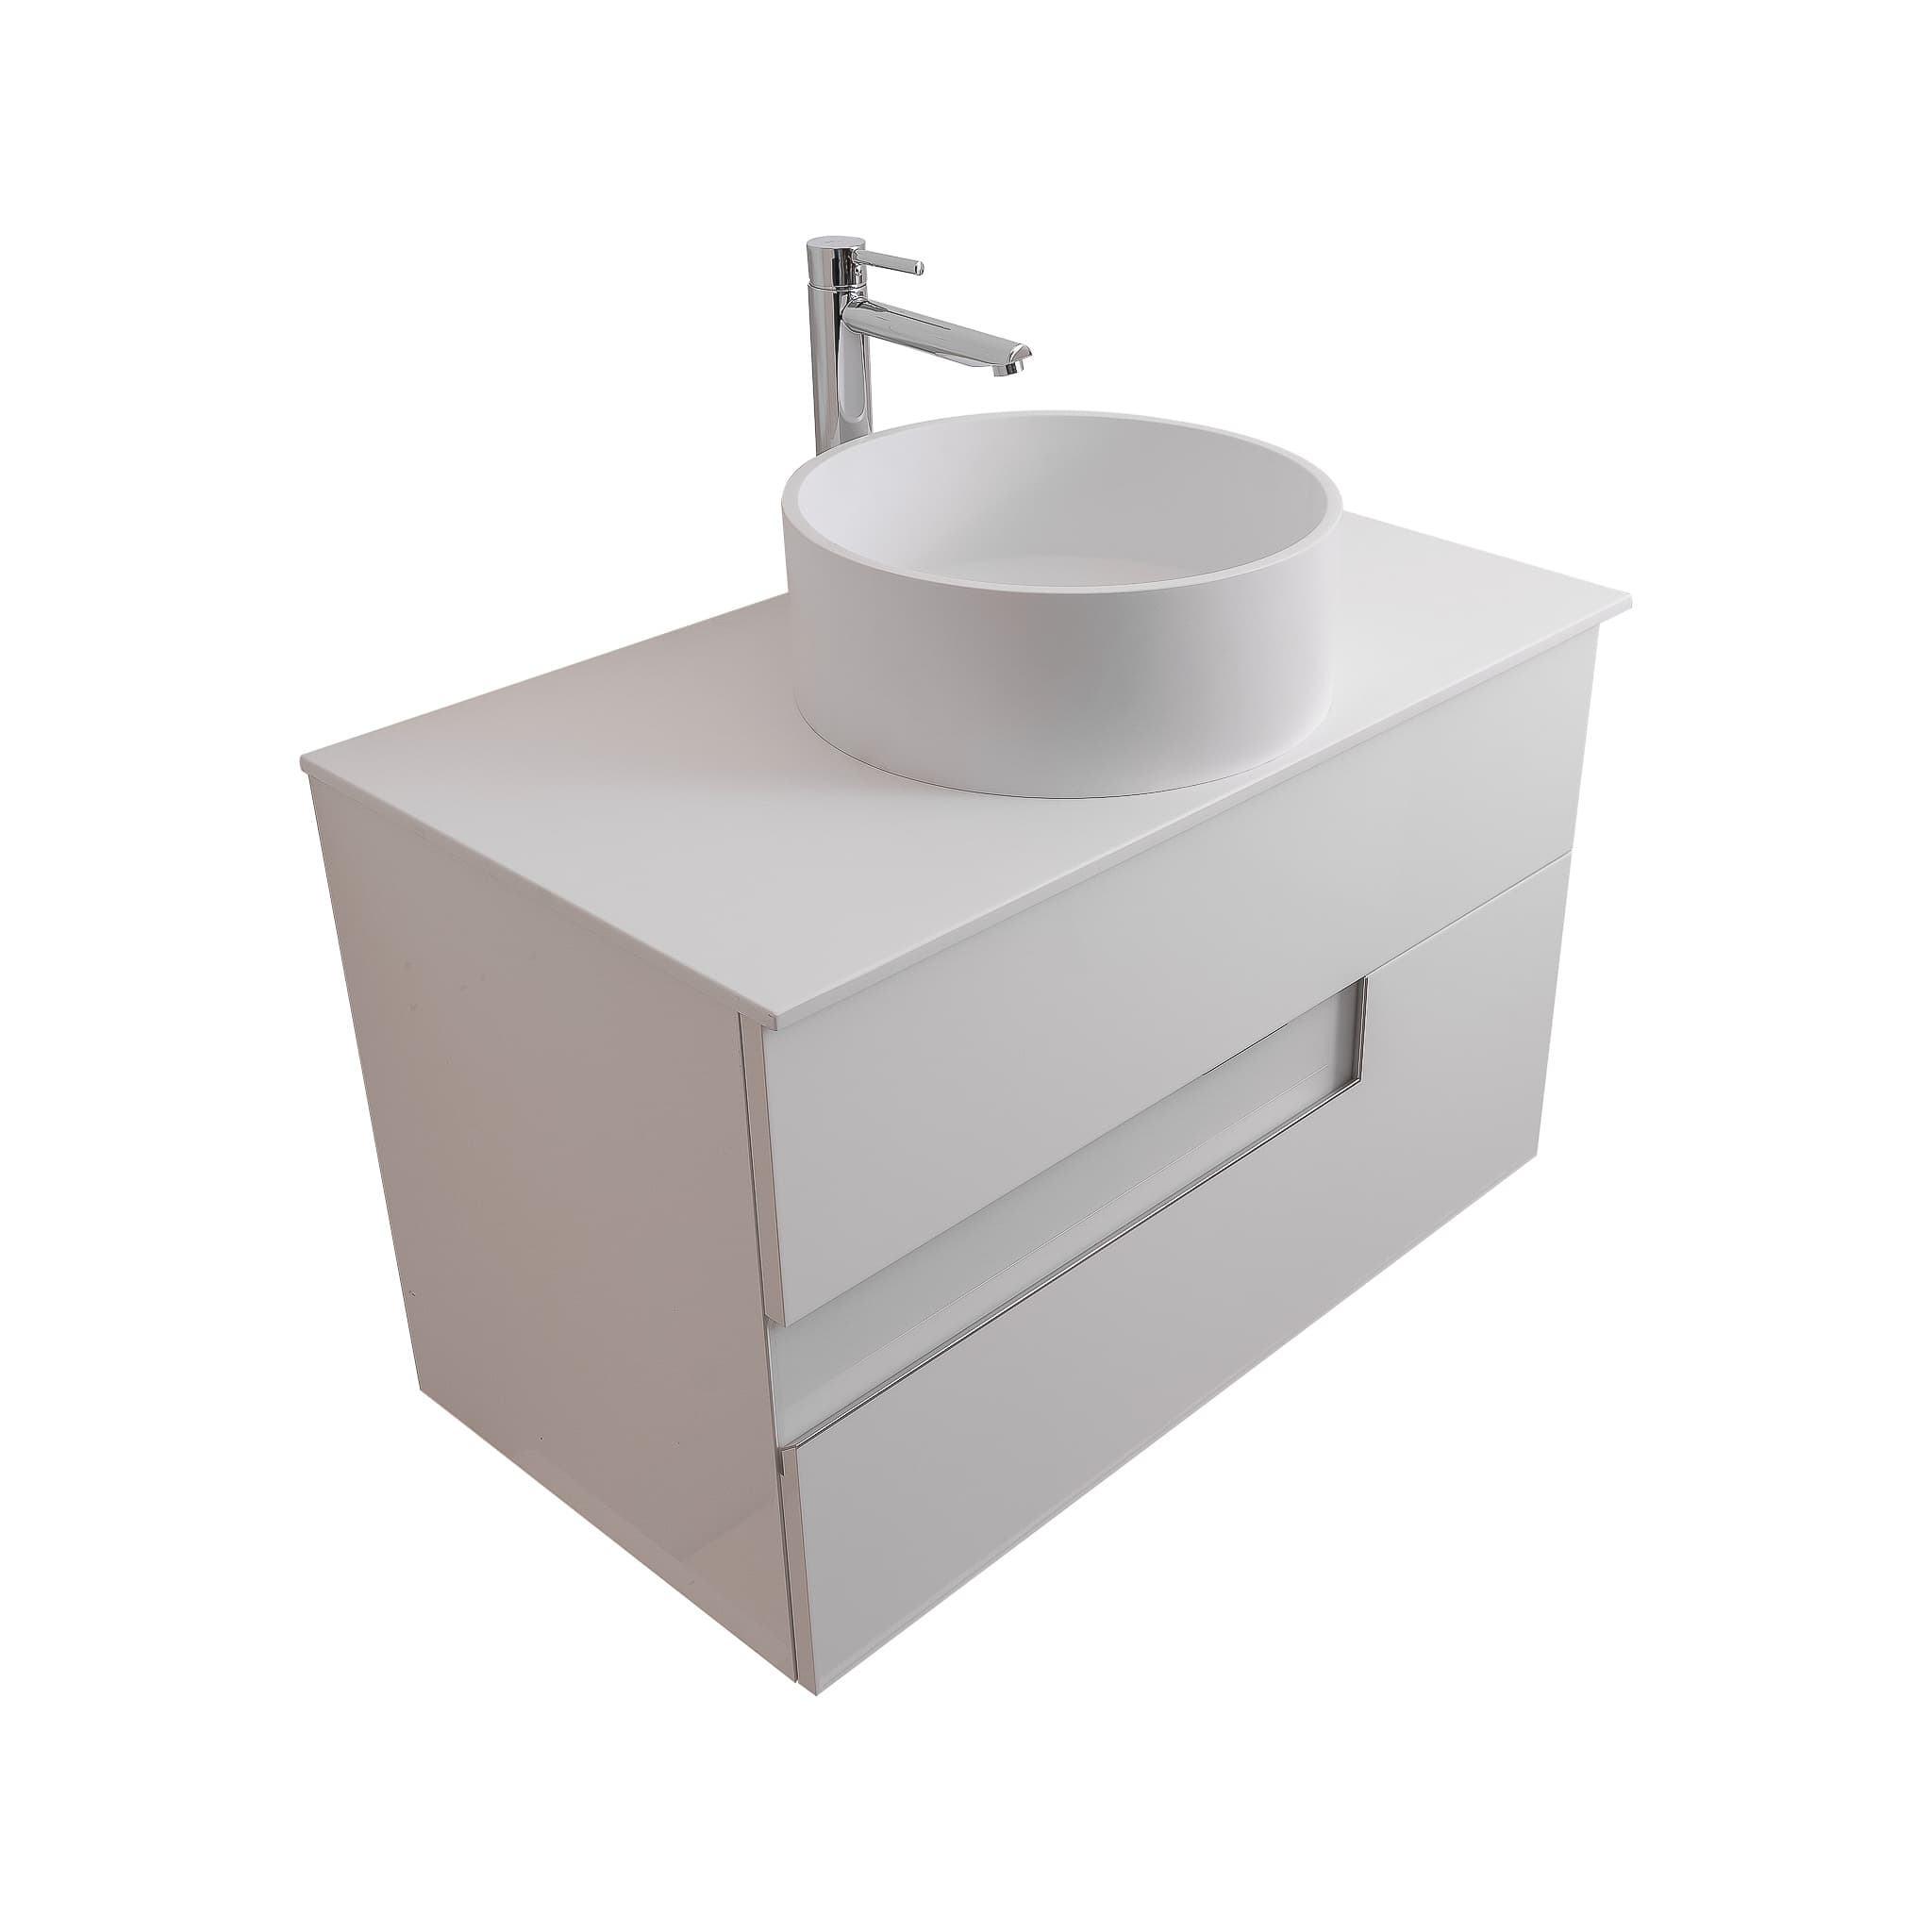 Vision 35.5 White High Gloss Cabinet, Solid Surface Flat White Counter And Round Solid Surface White Basin 1386, Wall Mounted Modern Vanity Set